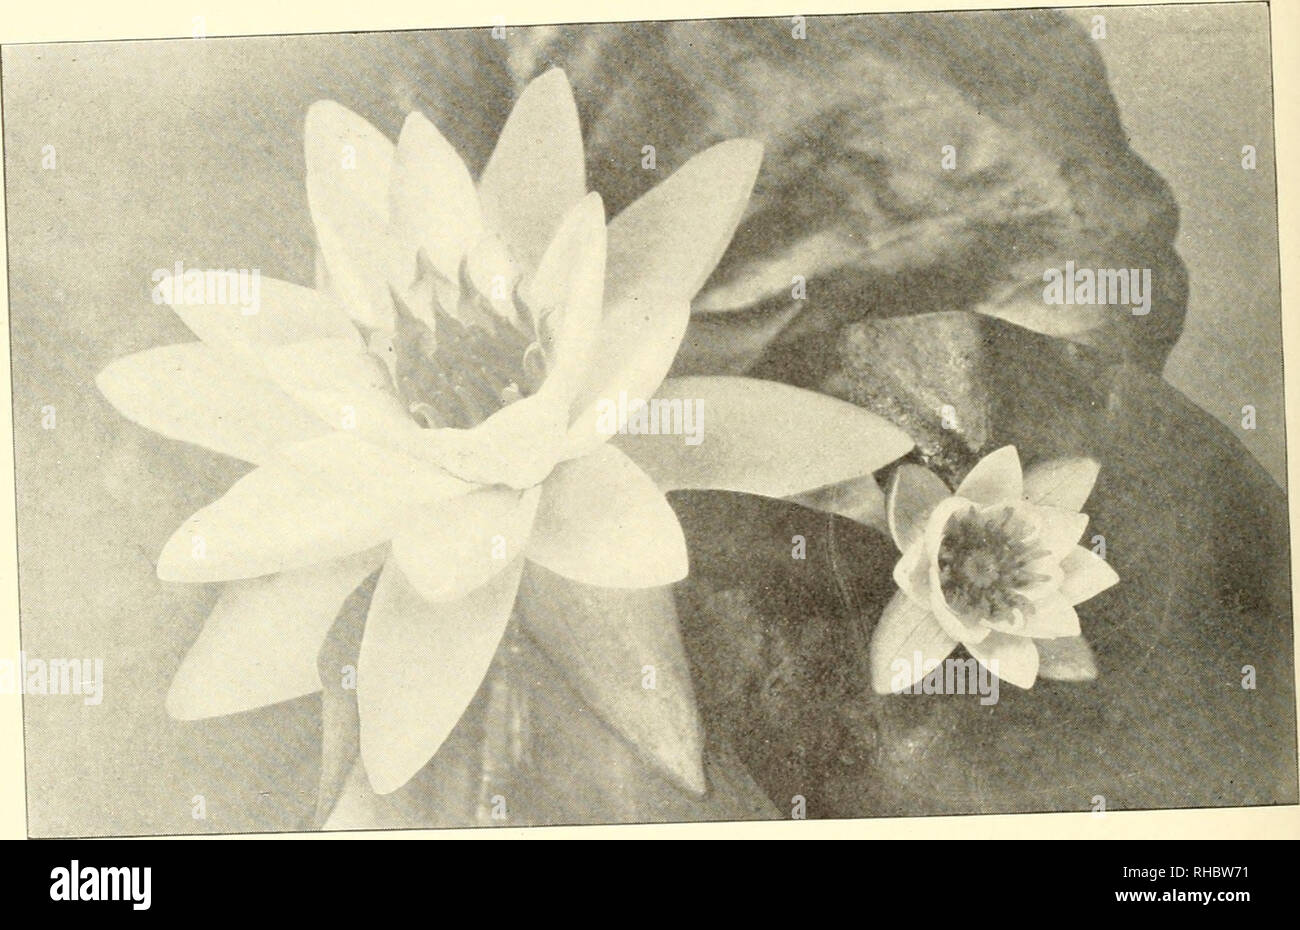 . The book of water gardening;. Aquatic plants. [from old catalog]. THE BOOK OF WATER GARDENING very lar.e. The plant blooms freely. This yariety shows s.gns ot tuberosa Tar â a^e hr its leaves and growth. The leaves are dark green, the leaf stalk bdl&quot; st-ped brown as in Xyn,ph- tuberosa. The plant is also ntcUned to push the leaves above the water. r i i â i â ^a With Nyntph^a Laydekeri rosea we come to a distinct class of hybr.ds. ra. d by M. Latour-Marliac. of Ten,ple-snr-Lc.. France, who has giv.n us ntany eauU^ ful and interesting hybrid water lilies. This lily is of the fornt ot Xjm Stock Photo